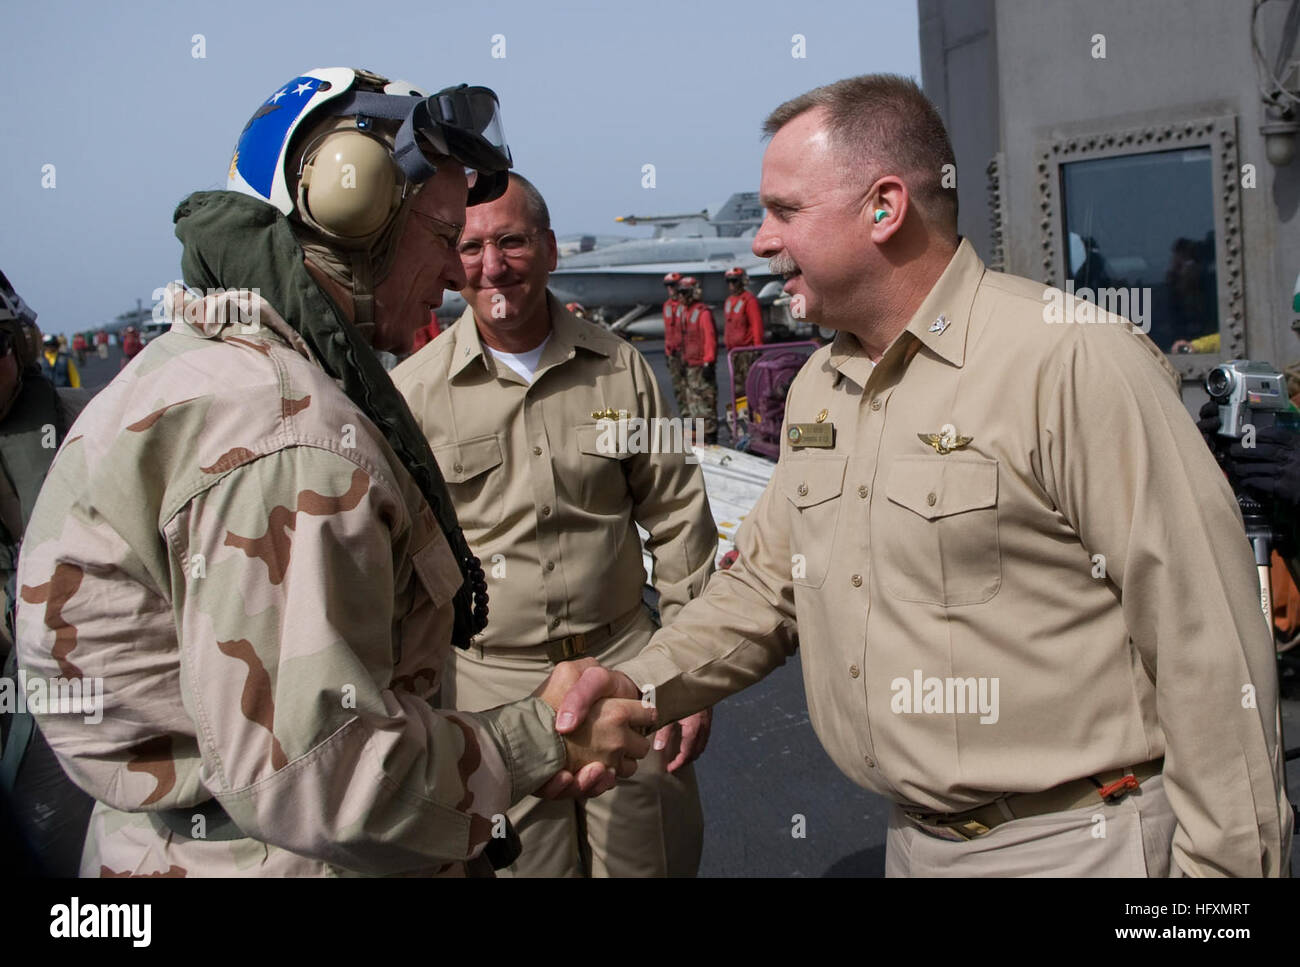 090713-N-0696M-064  GULF OF OMAN (July 13, 2009) Adm. Mike Mullen, left, chairman of the Joint Chiefs of Staff, is greeted by Capt. Kenneth Norton, commanding officer of the aircraft carrier USS Ronald Reagan (CVN 76) in the Gulf of Oman. Mullen is accompanying a USO tour featuring Hall of Fame NFL coach Don Shula, All-Pro NFL running back Warrick Dunn, actors Bradley Cooper and D.B. Cooper and sports announcer and model Leeann Sweeden on a visit to the Central Command area of responsibility. (U.S. Navy photo by Mass Communication Specialist 1st Class Chad J. McNeeley/Released) US Navy 090713- Stock Photo